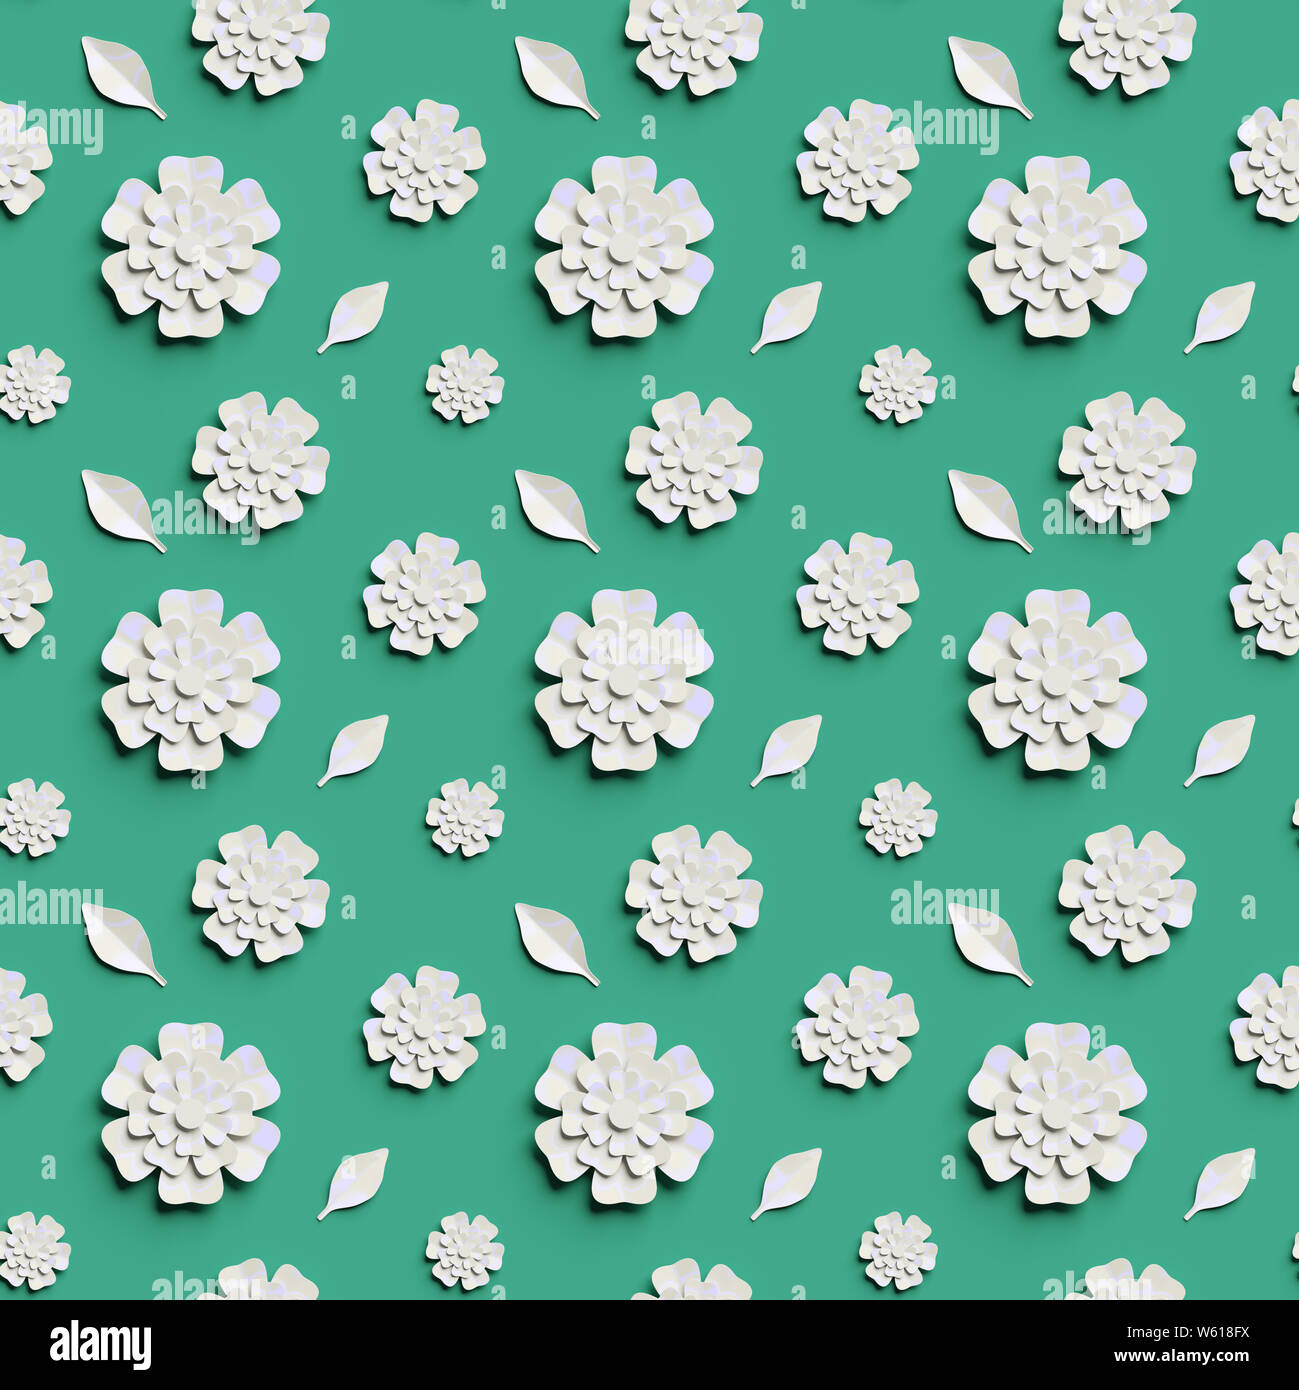 12,929 Lime Green Floral Wallpaper Images, Stock Photos, 3D objects, &  Vectors